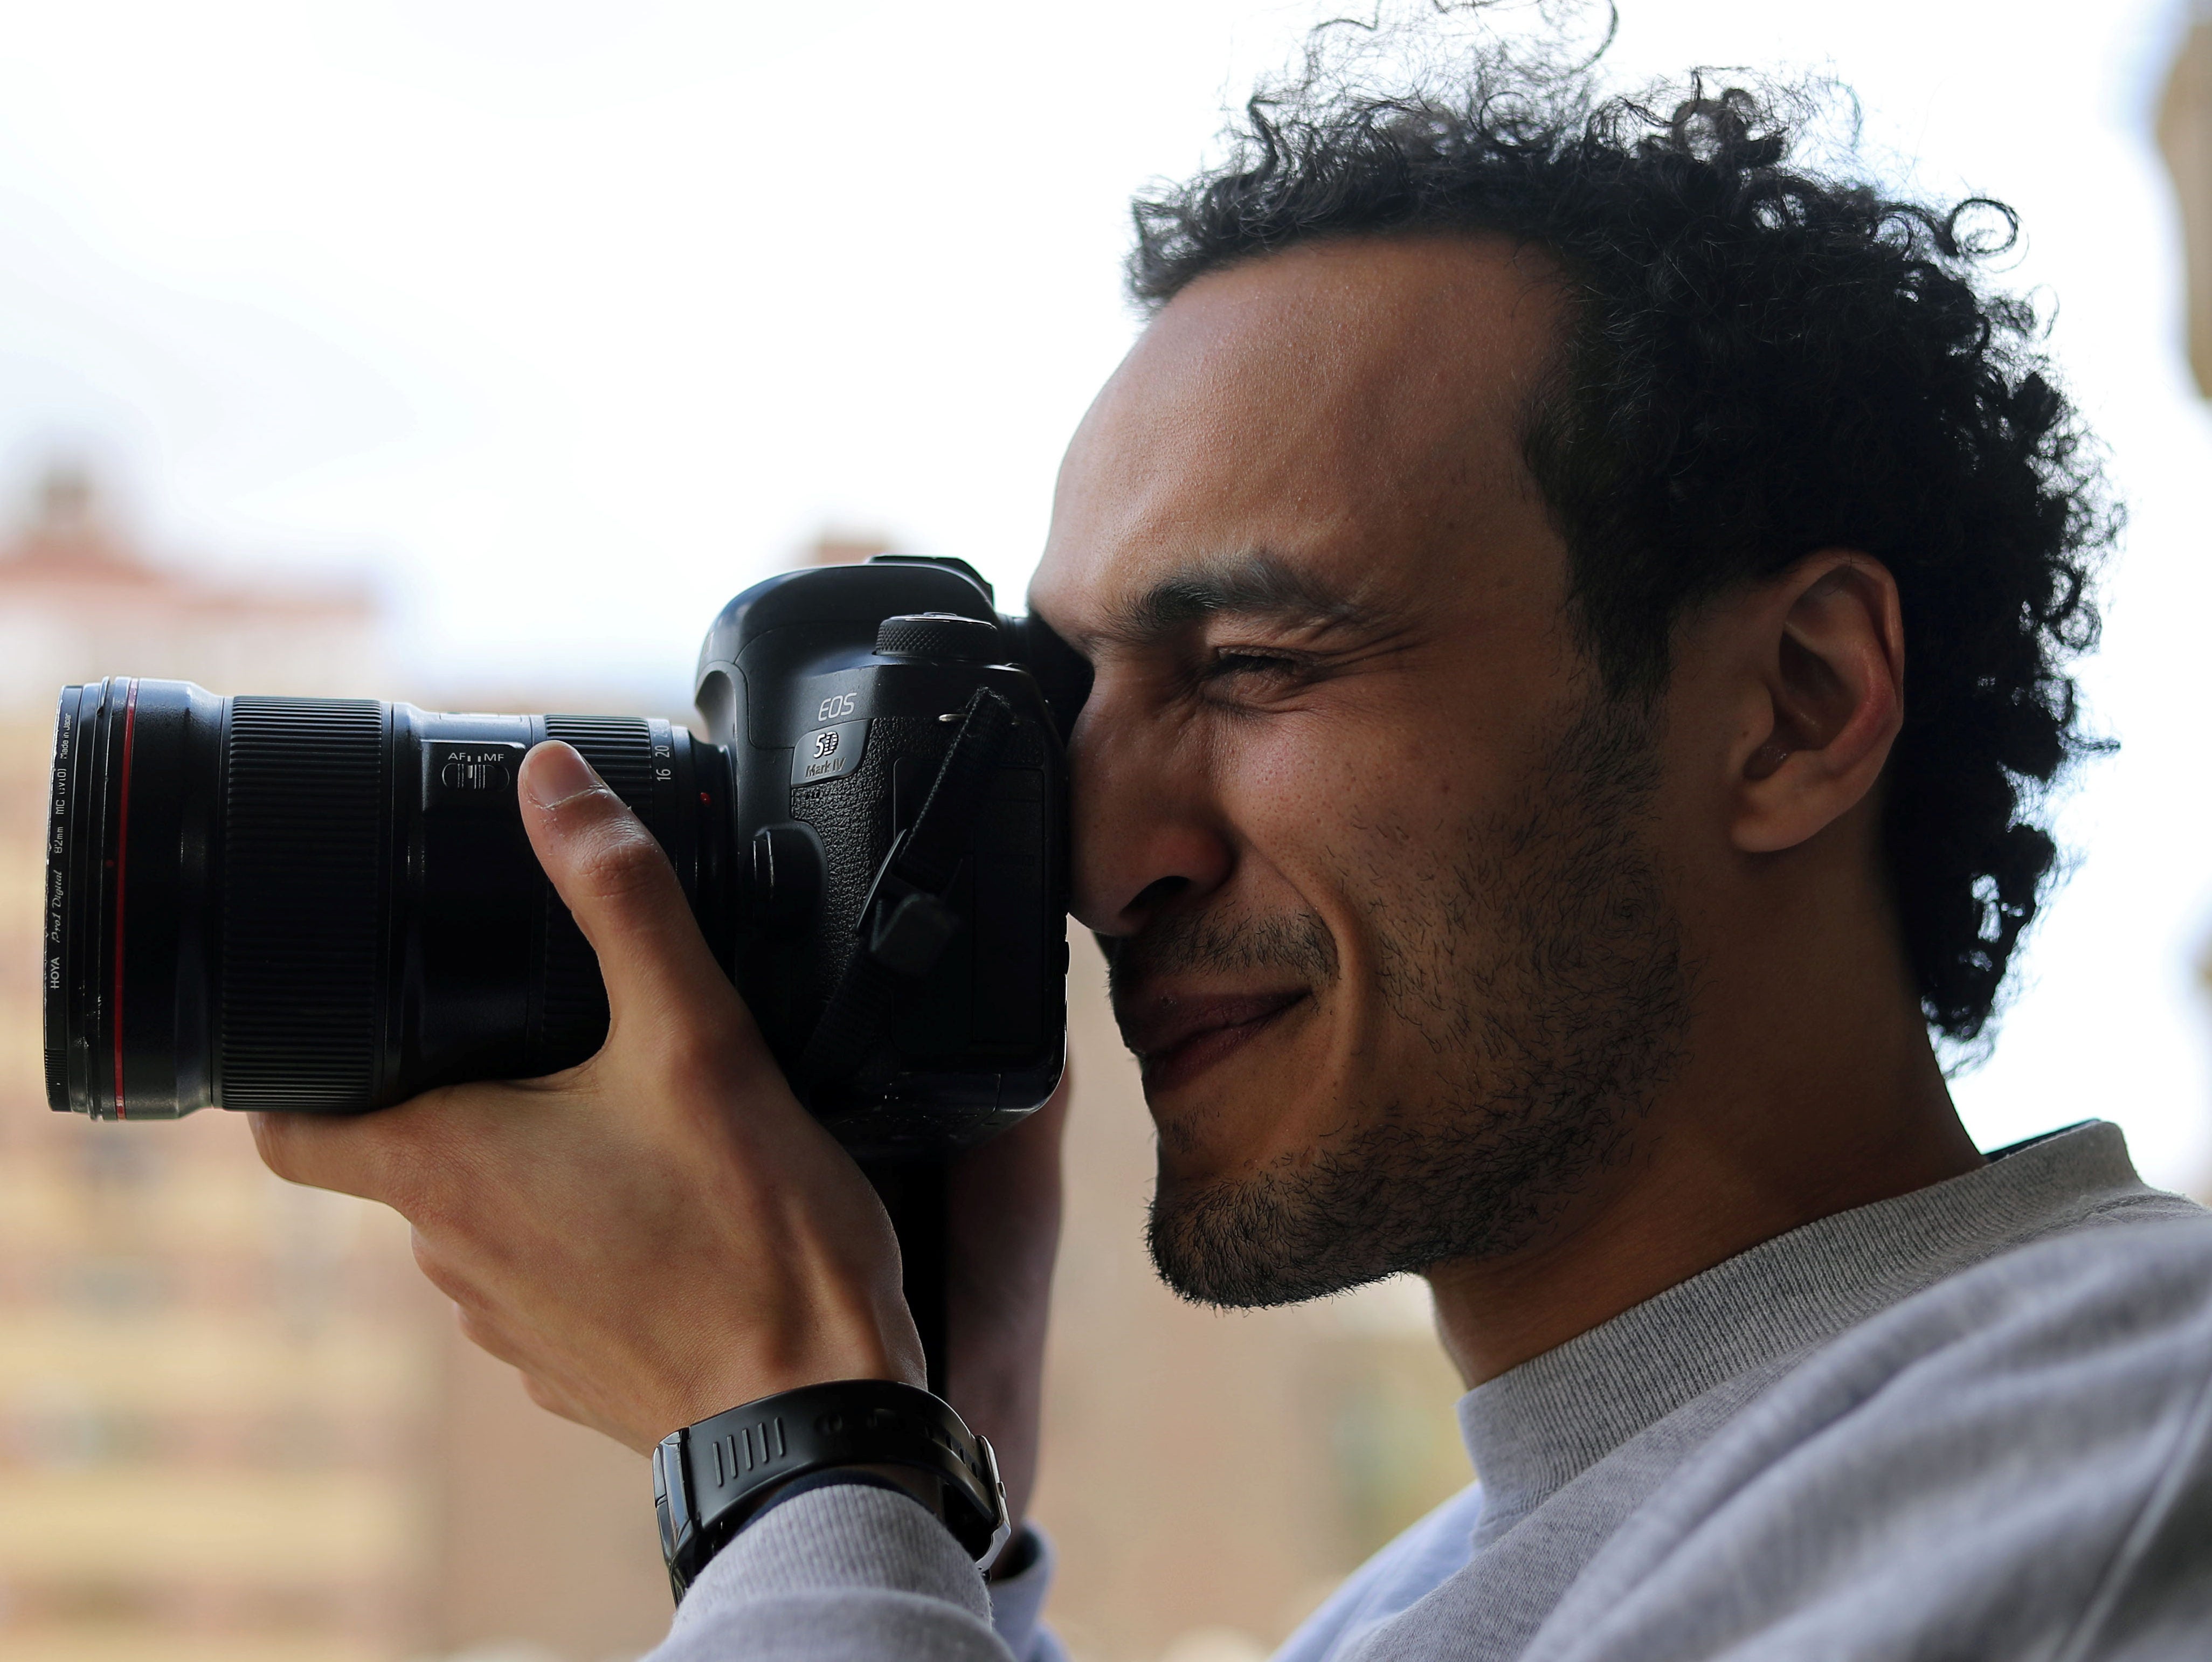 Egyptian photojournalist released from prison after five years but must spend nights at police station